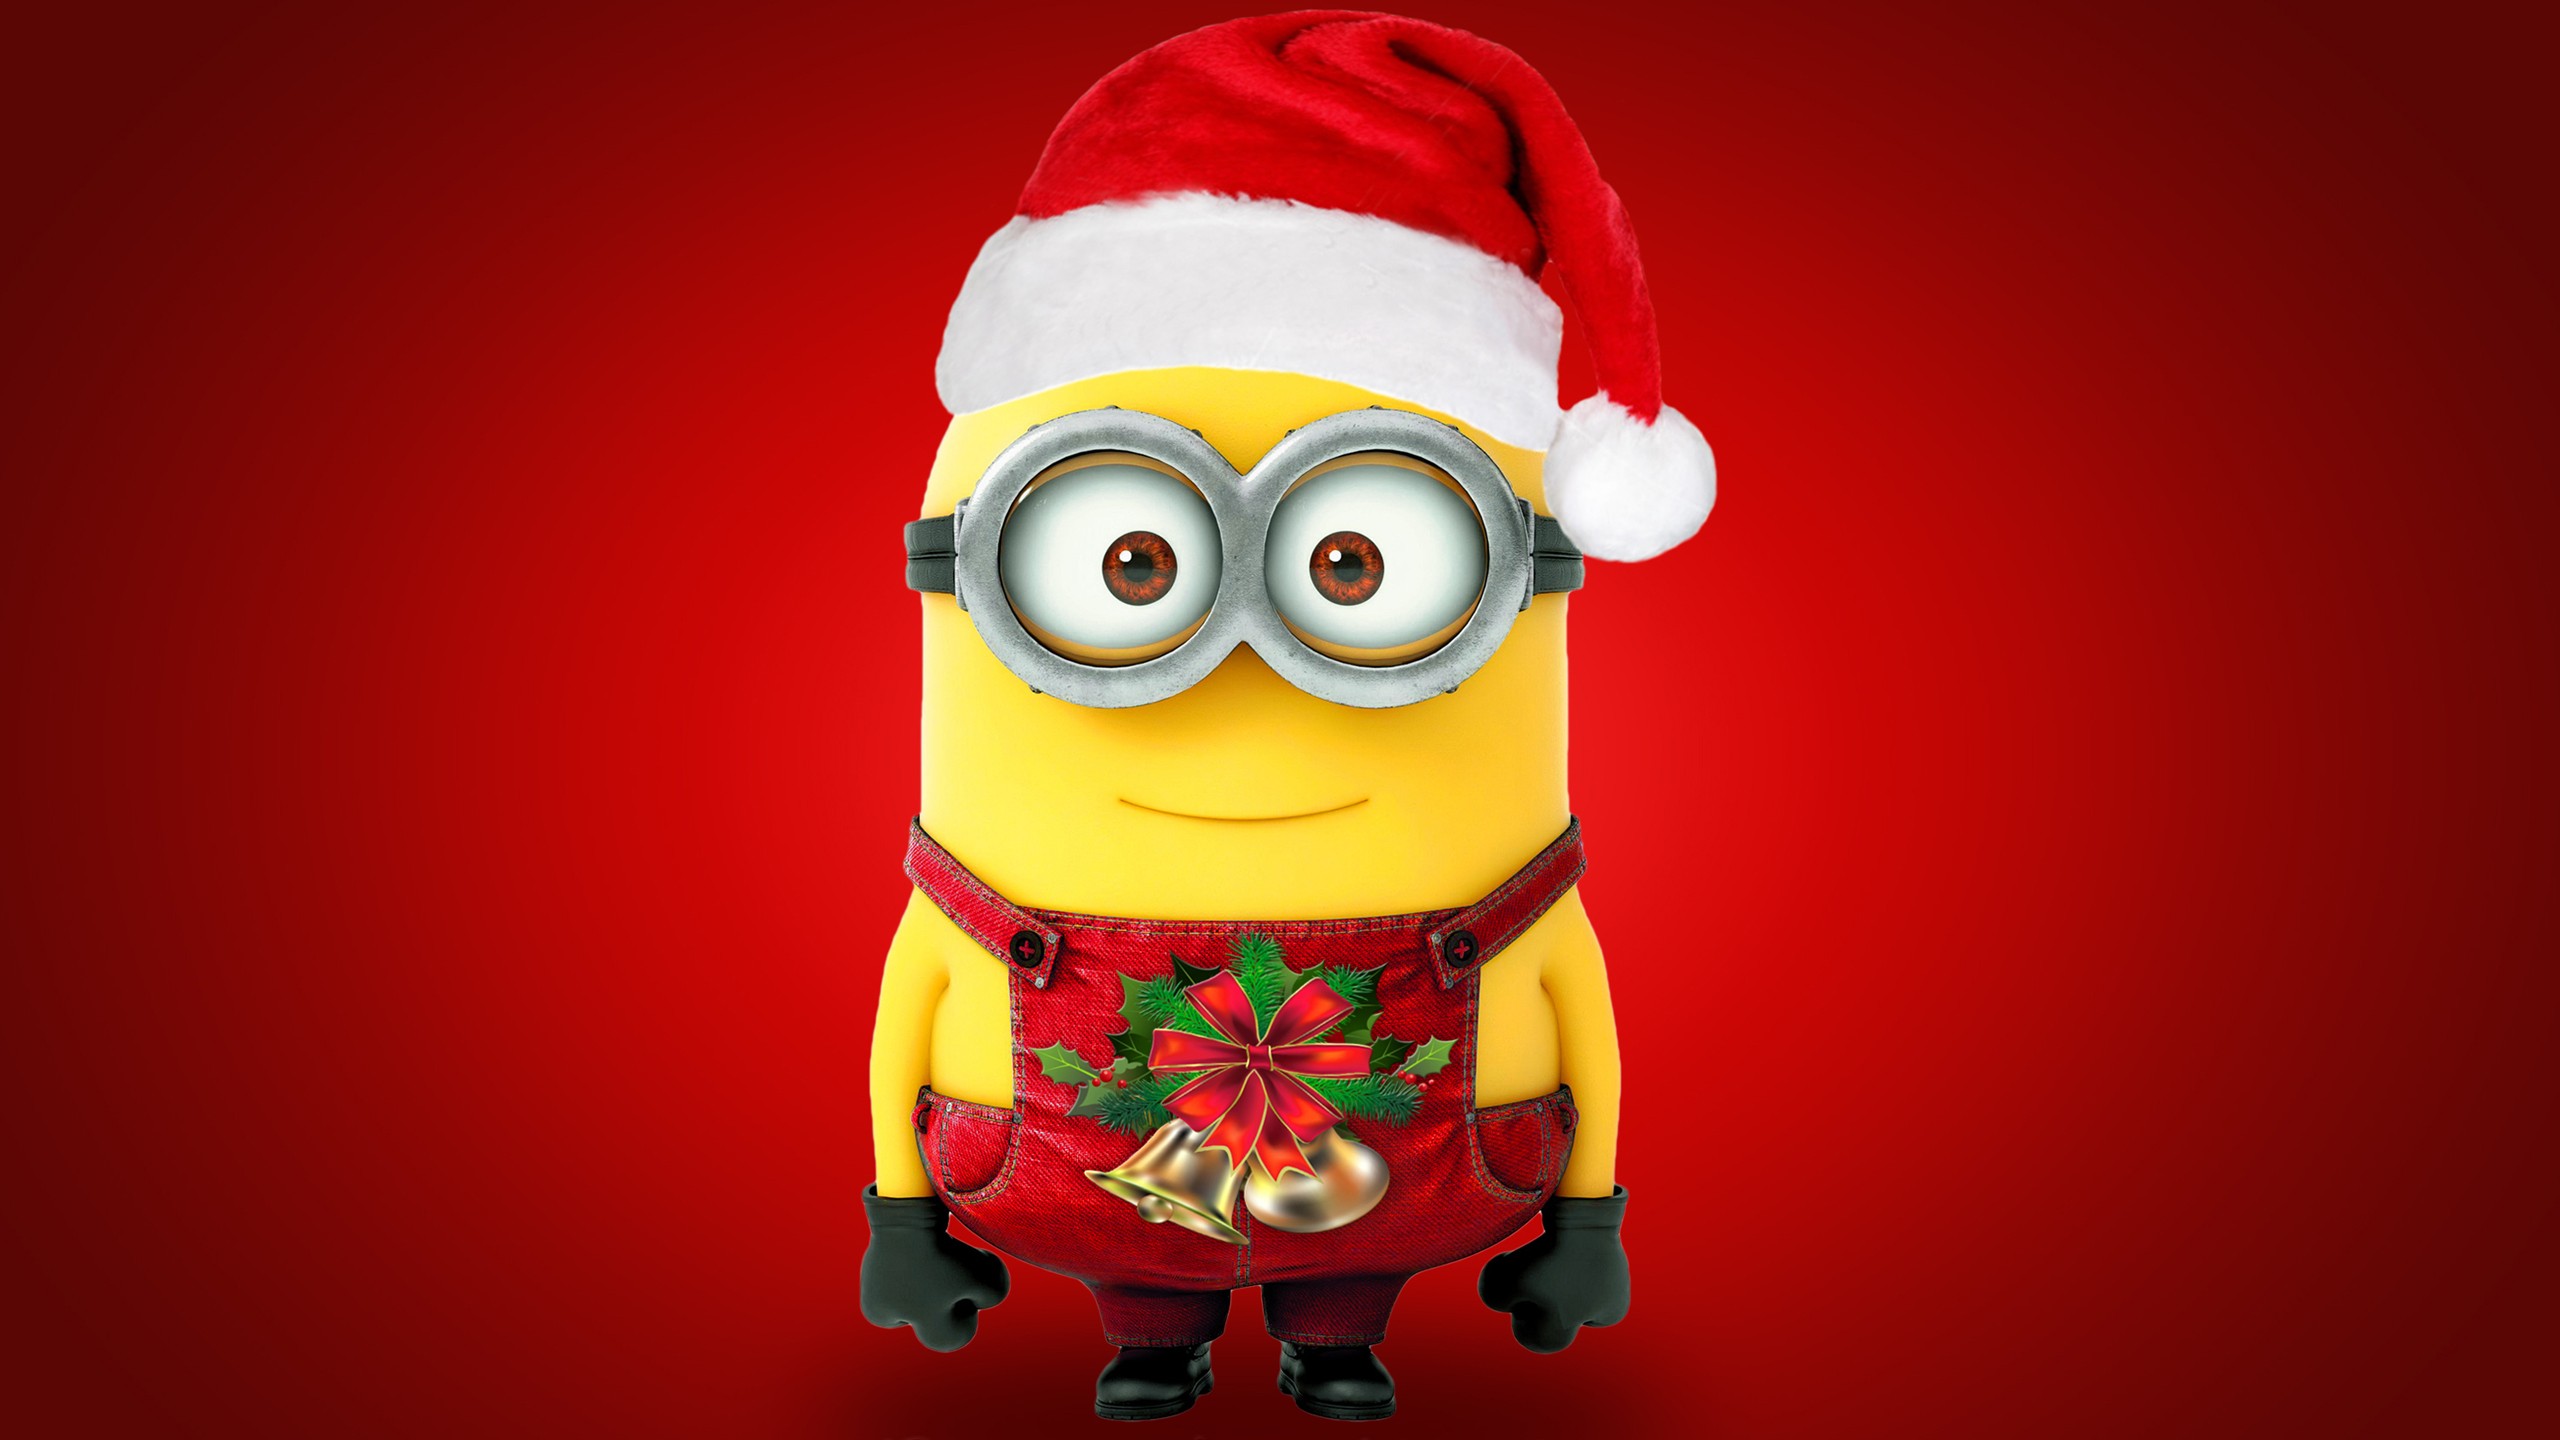 Despicable Me Christmas Minions Red Background 2560x1440